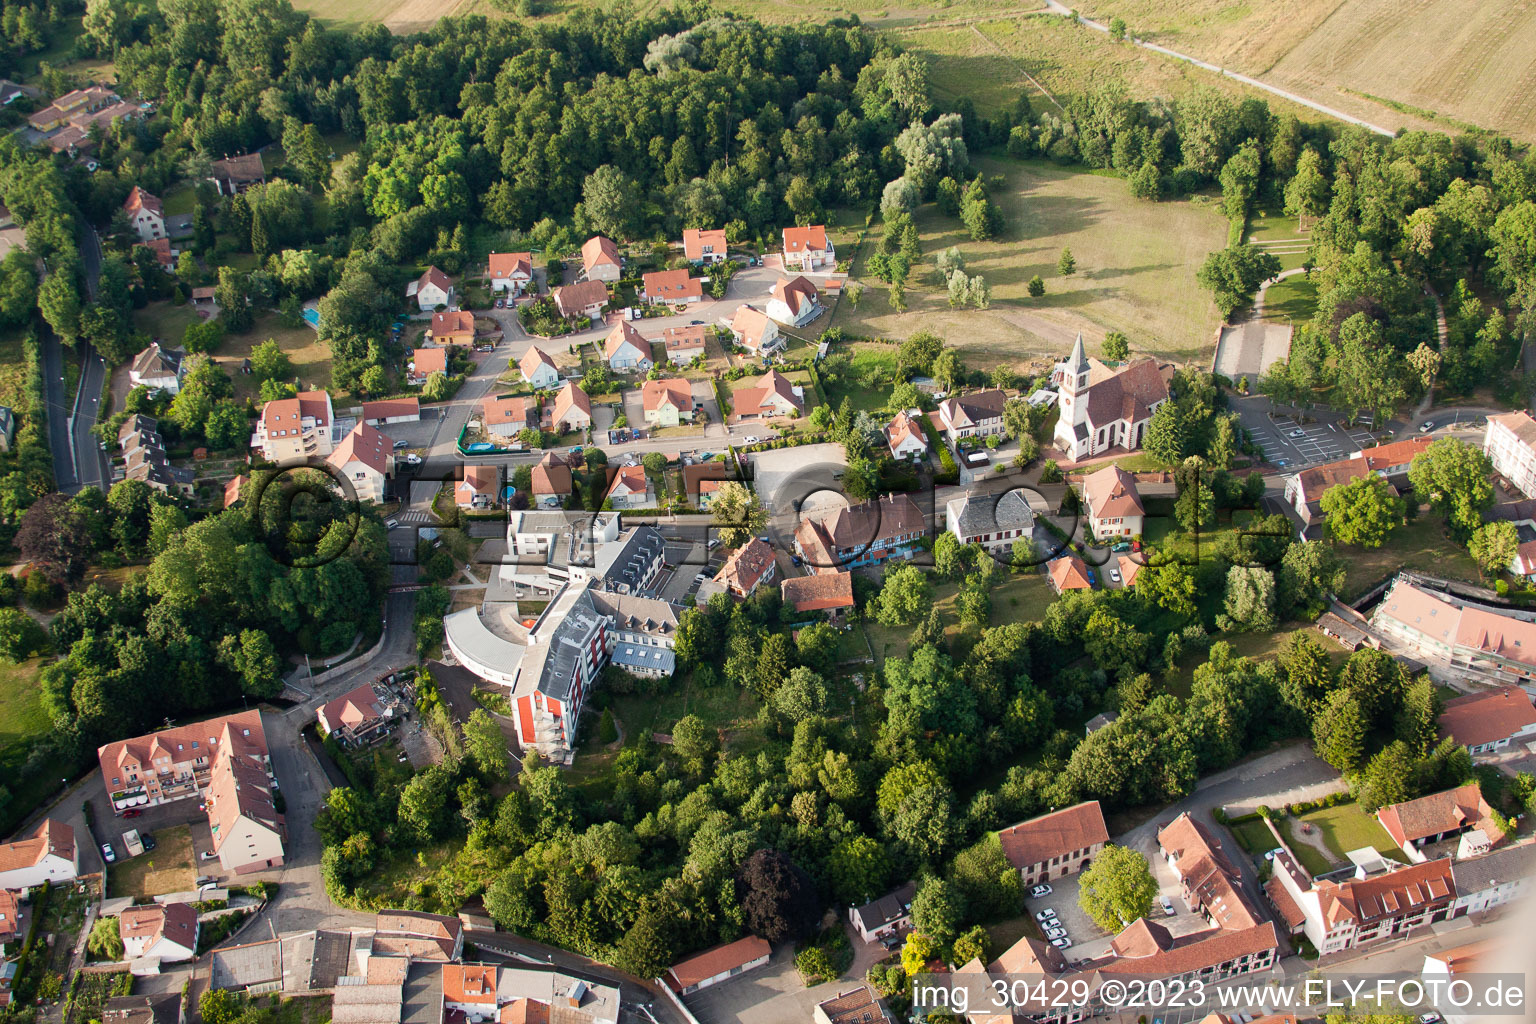 Bischwiller in the state Bas-Rhin, France from a drone